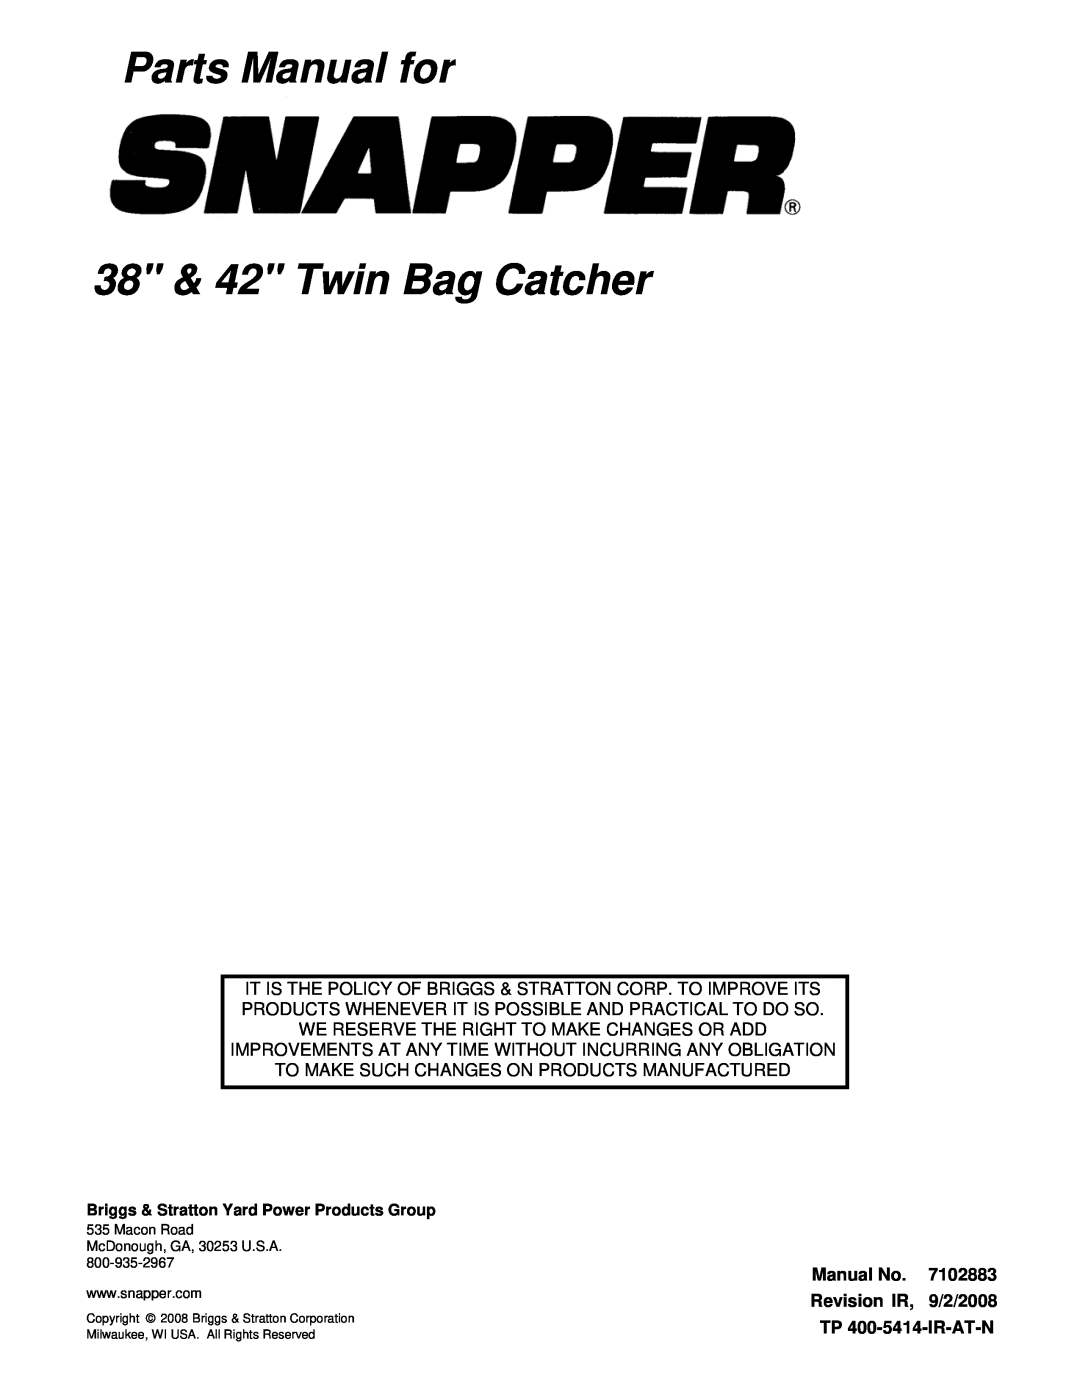 Snapper 1695171 Parts Manual for 38 & 42 Twin Bag Catcher, Revision IR, 9/2/2008, Manual No, 7102883, TP 400-5414-IR-AT-N 